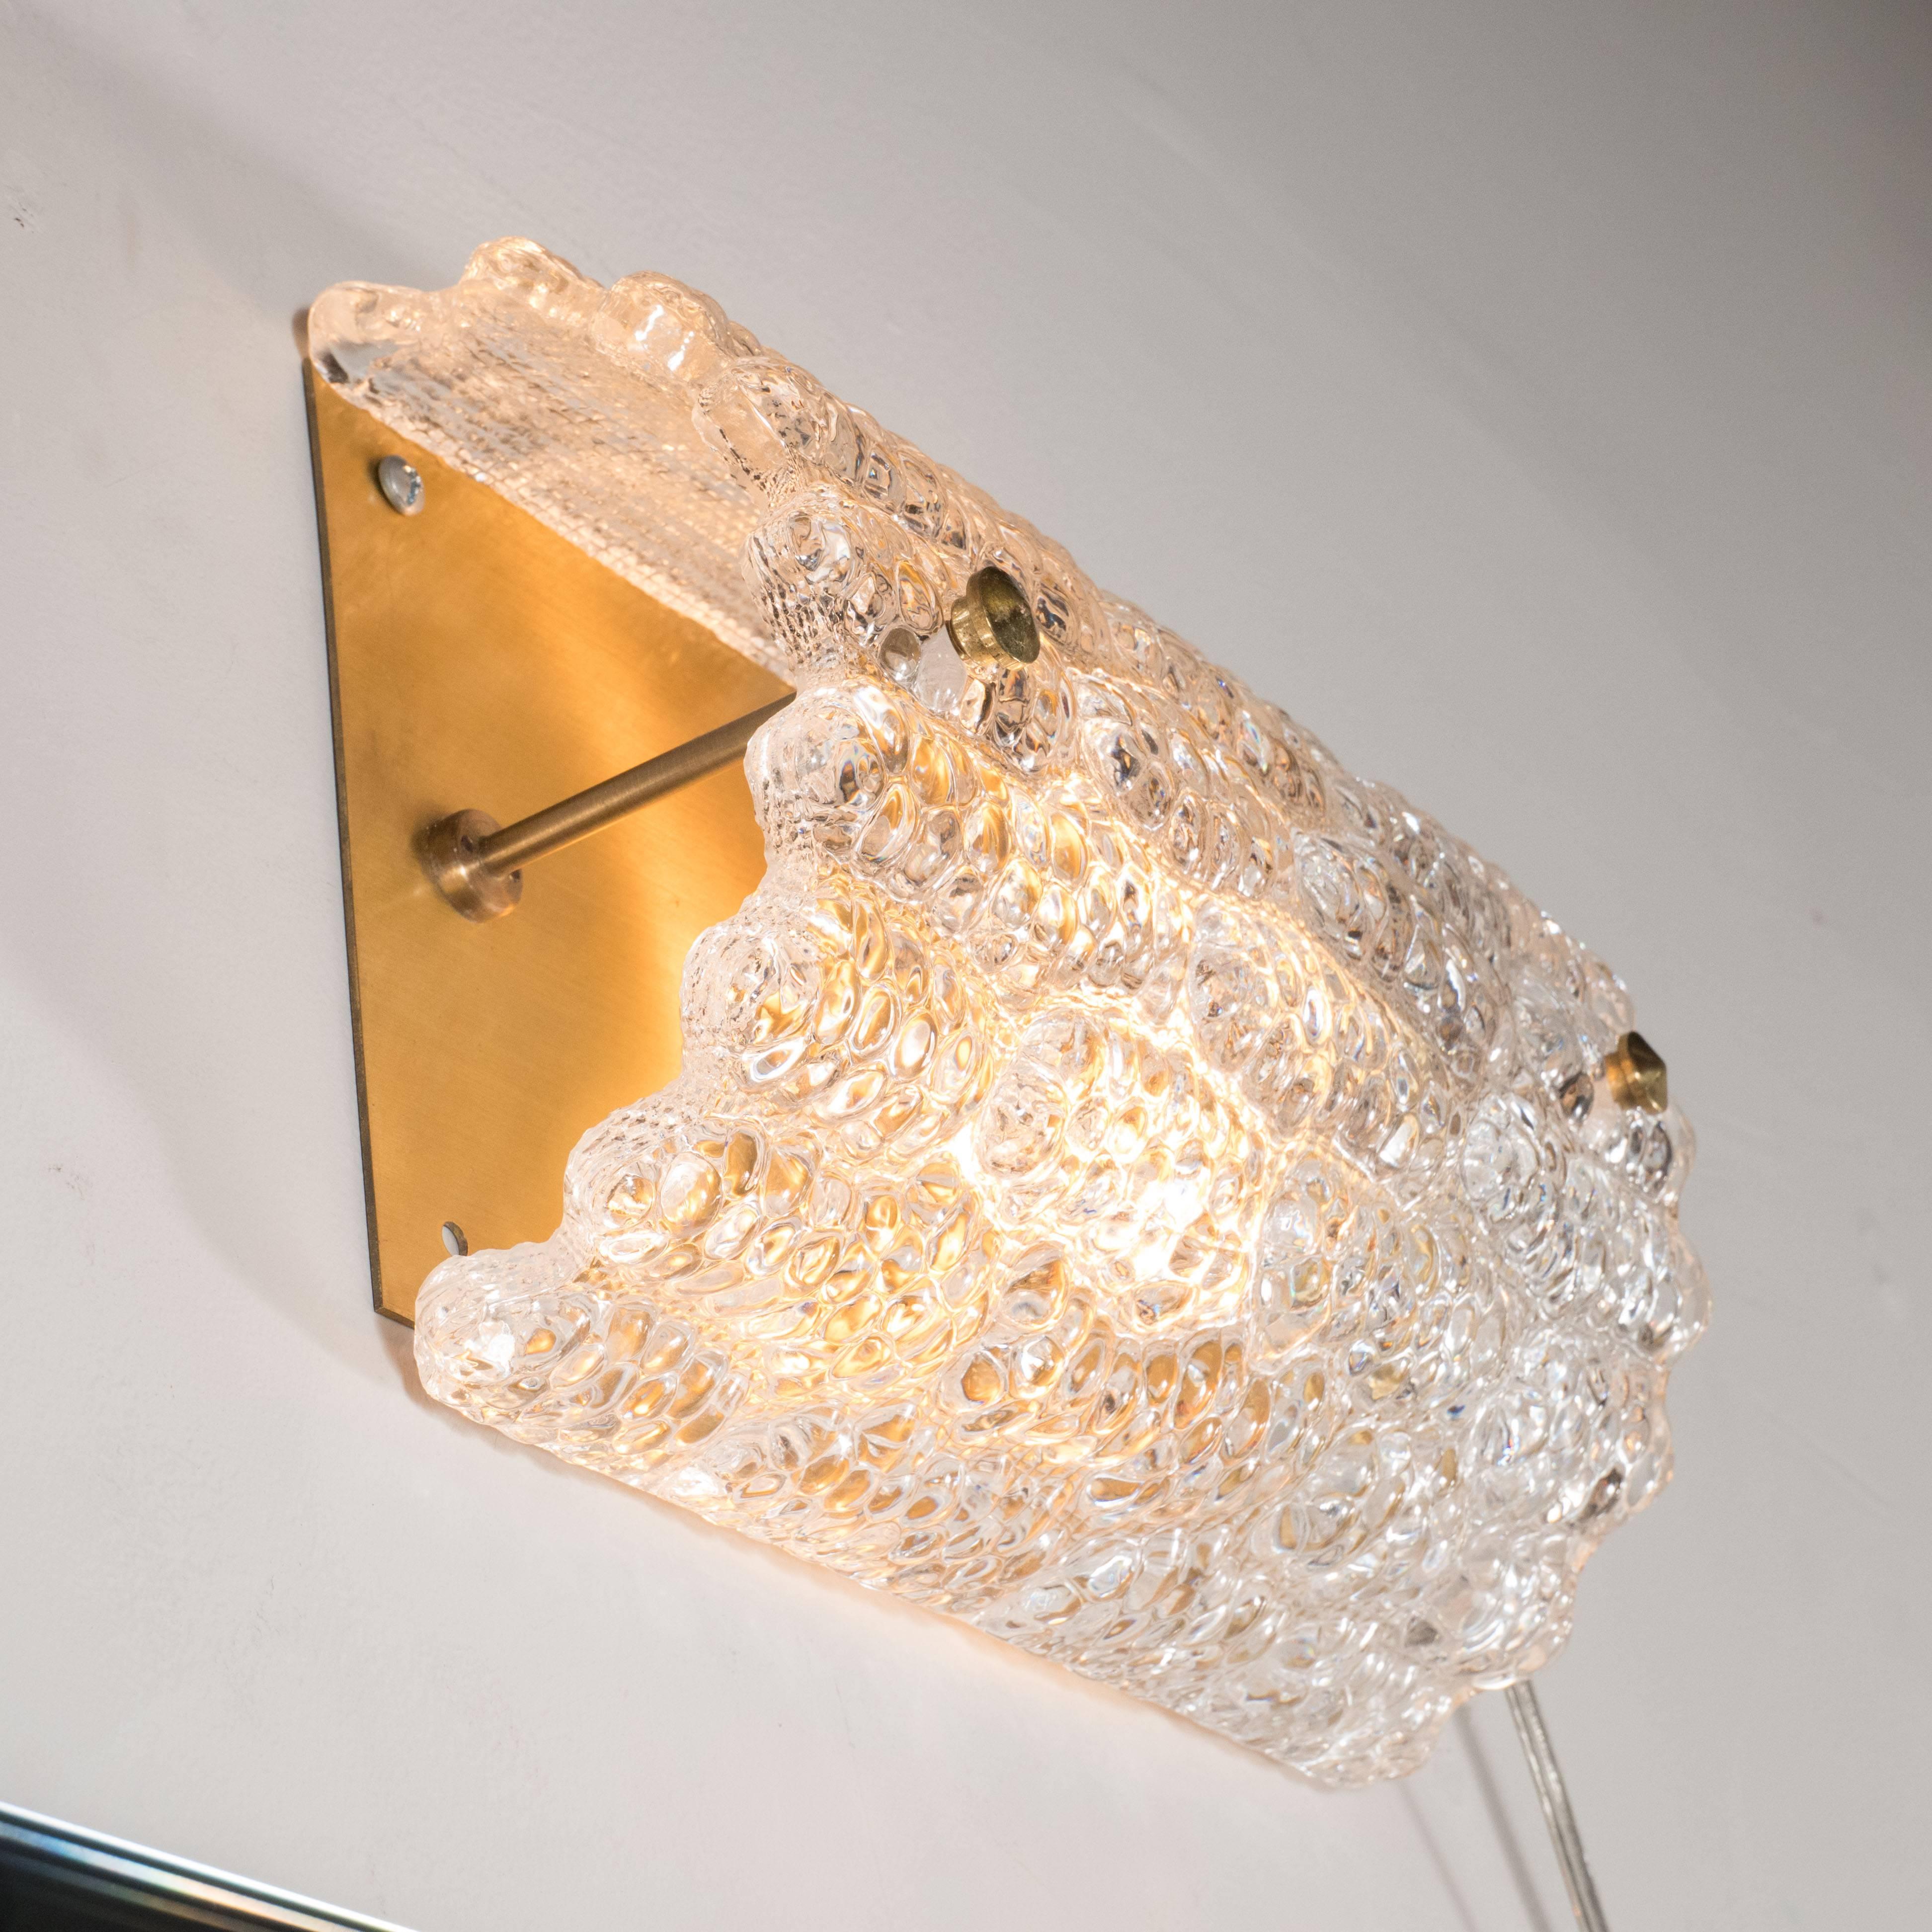 Swedish Sophisticated Mid-Century Modernist Vanity Light by Carl Fagerlund for Orrefors